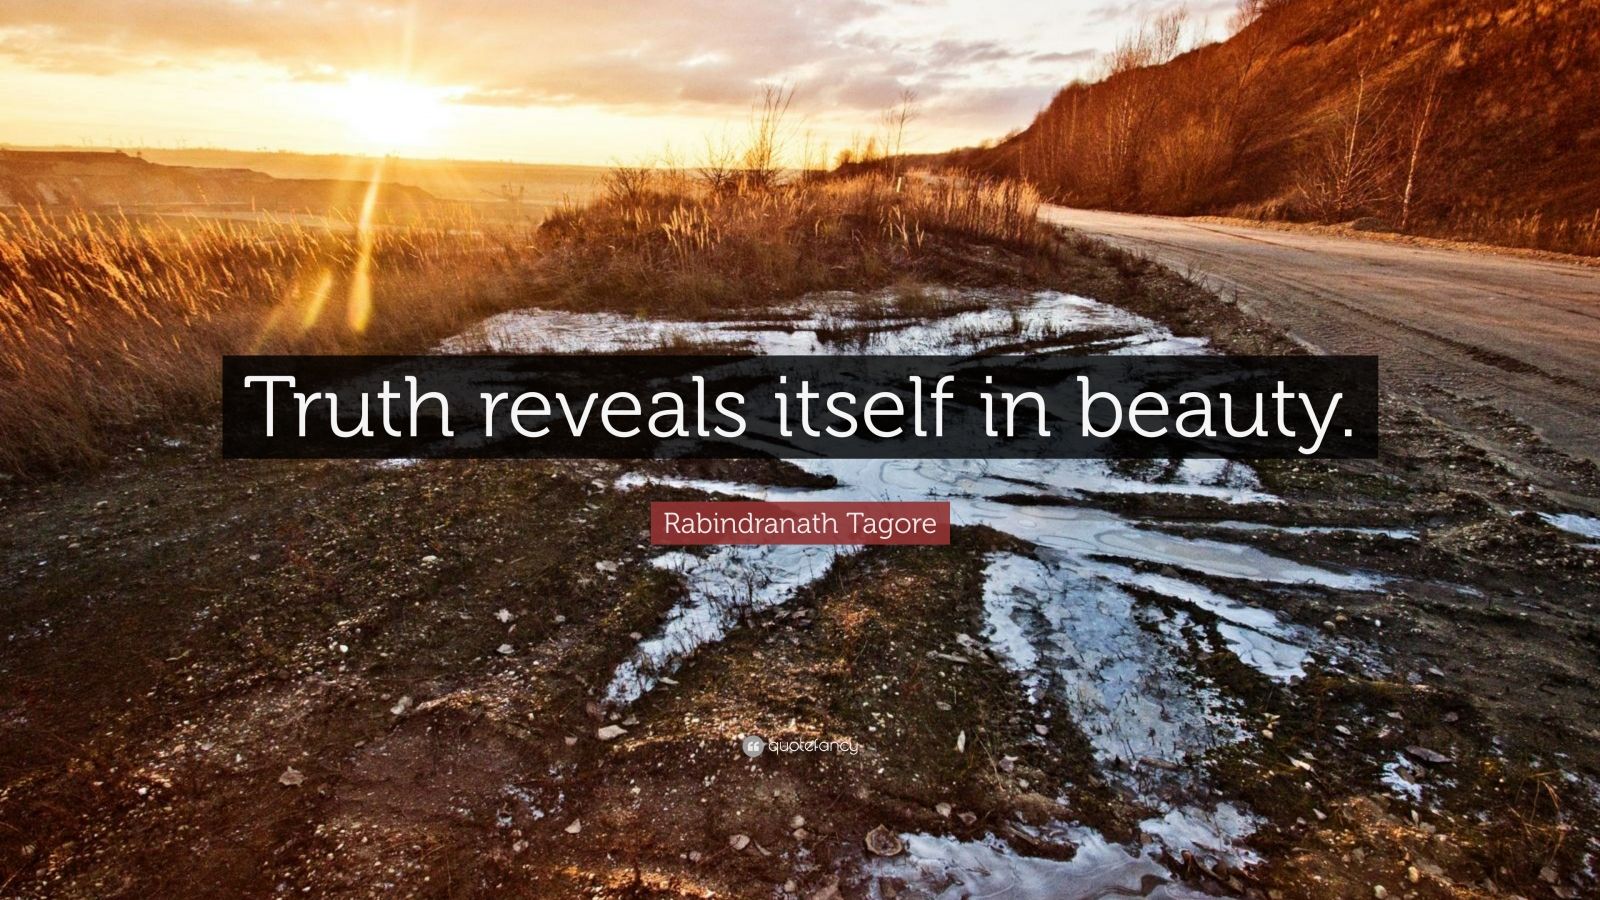 Rabindranath Tagore Quote “truth Reveals Itself In Beauty” 7